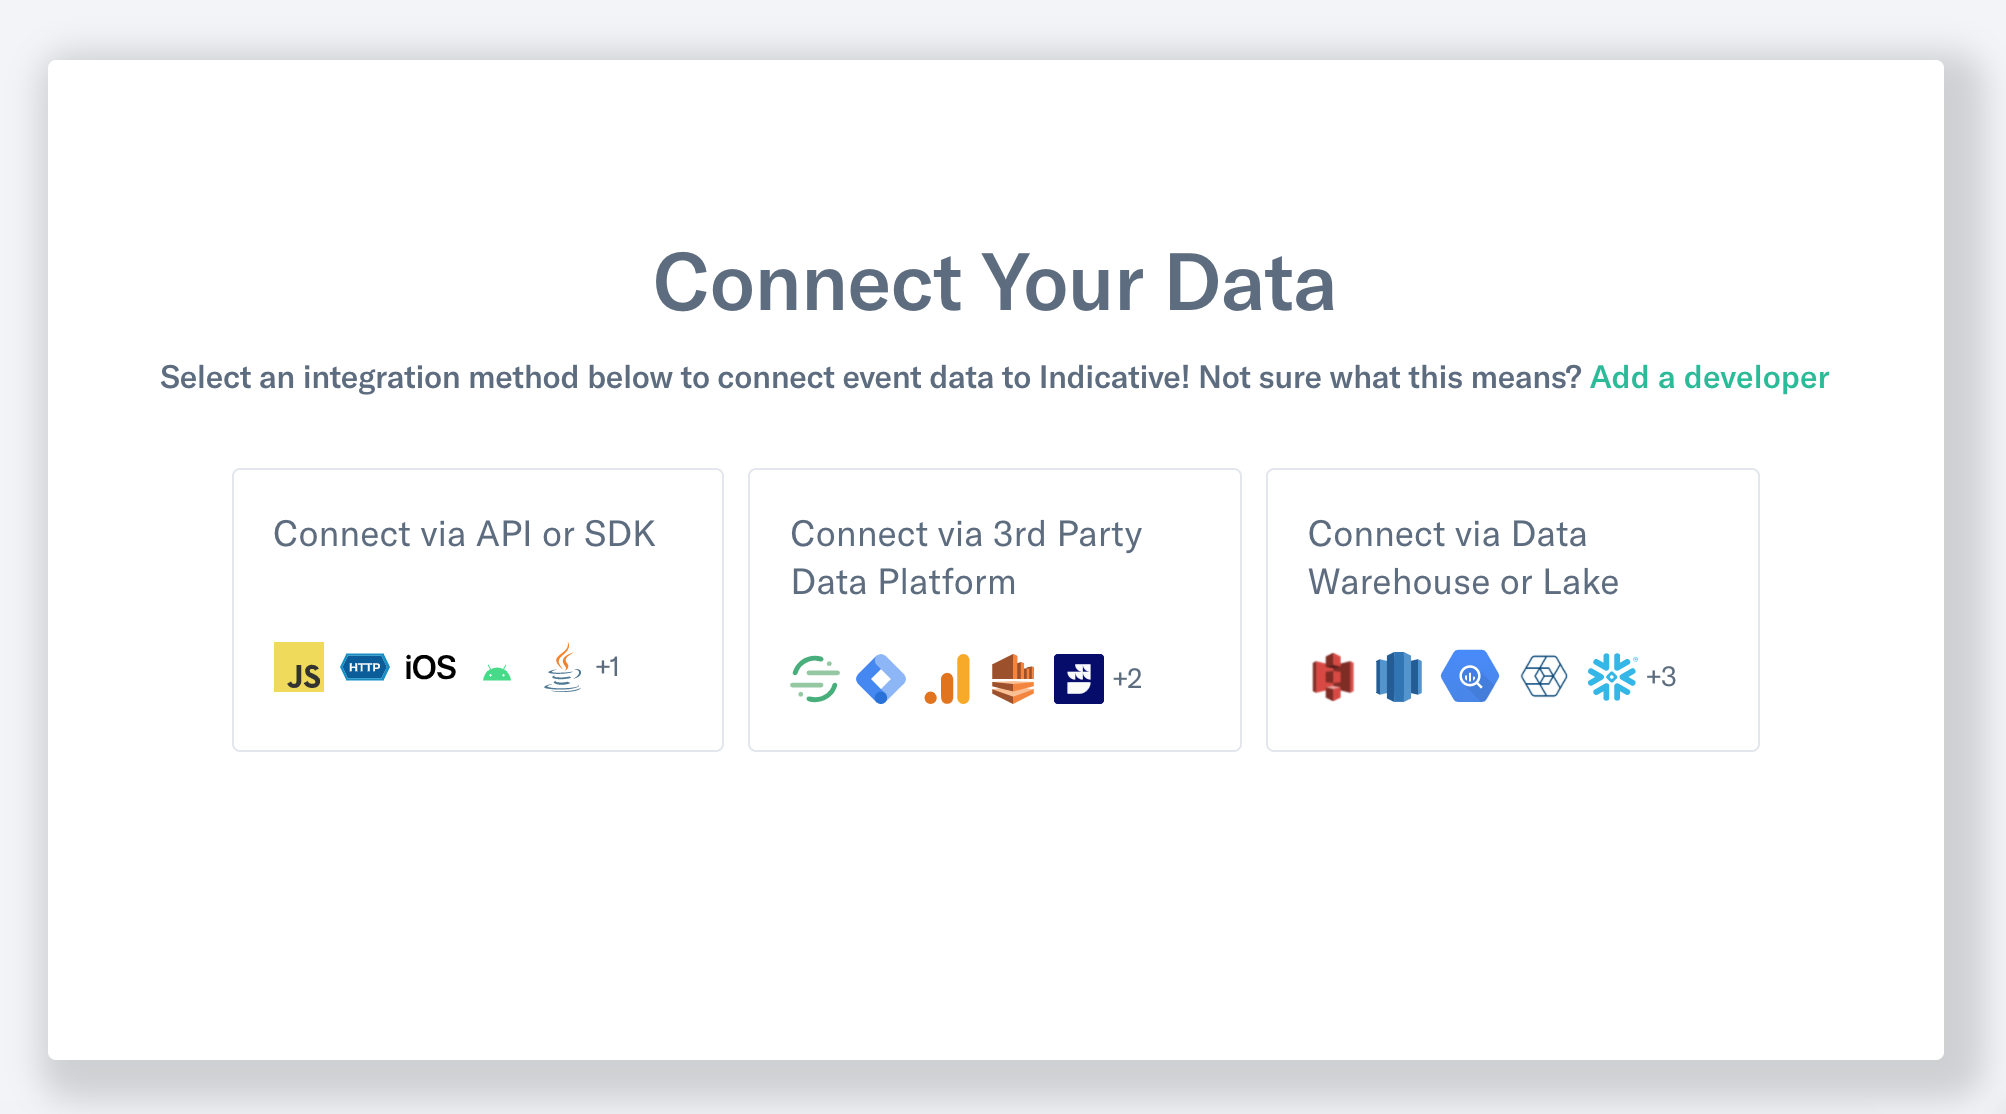 Connect Data